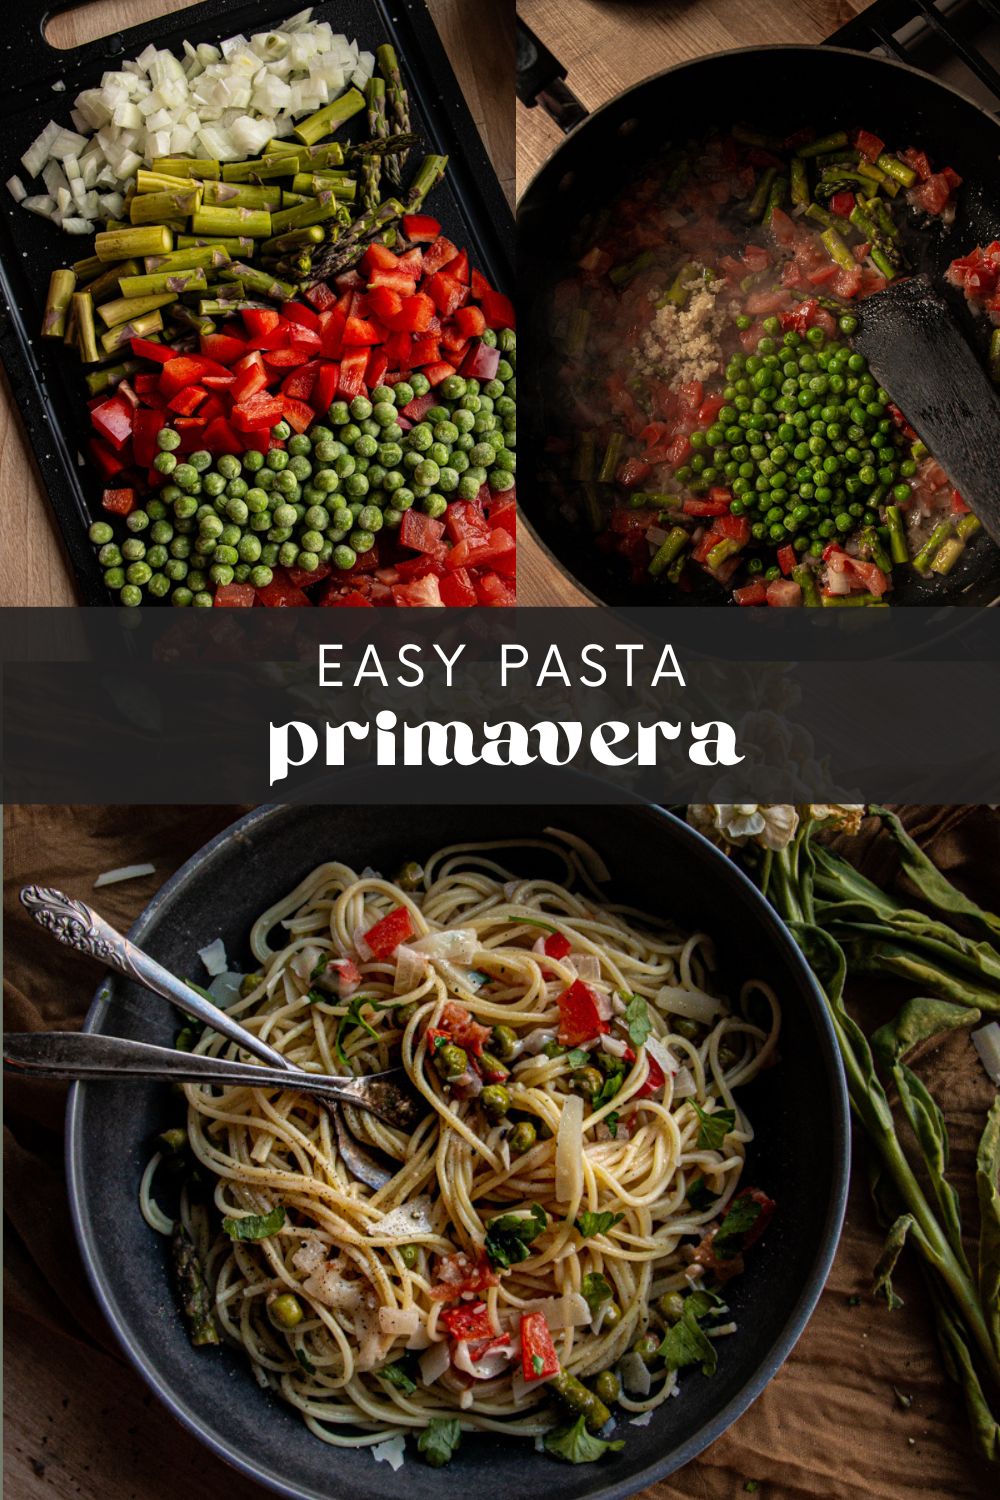 Bright colors and contrasting flavors make pasta primavera a fun, tasty dish for all occasions! From the crunch of the vegetables to the silkiness of the pasta primavera sauce - you won't believe just how easy it is to make! Full of freshness and super delicious, this pasta primavera recipe will quickly become a favorite in your household. 